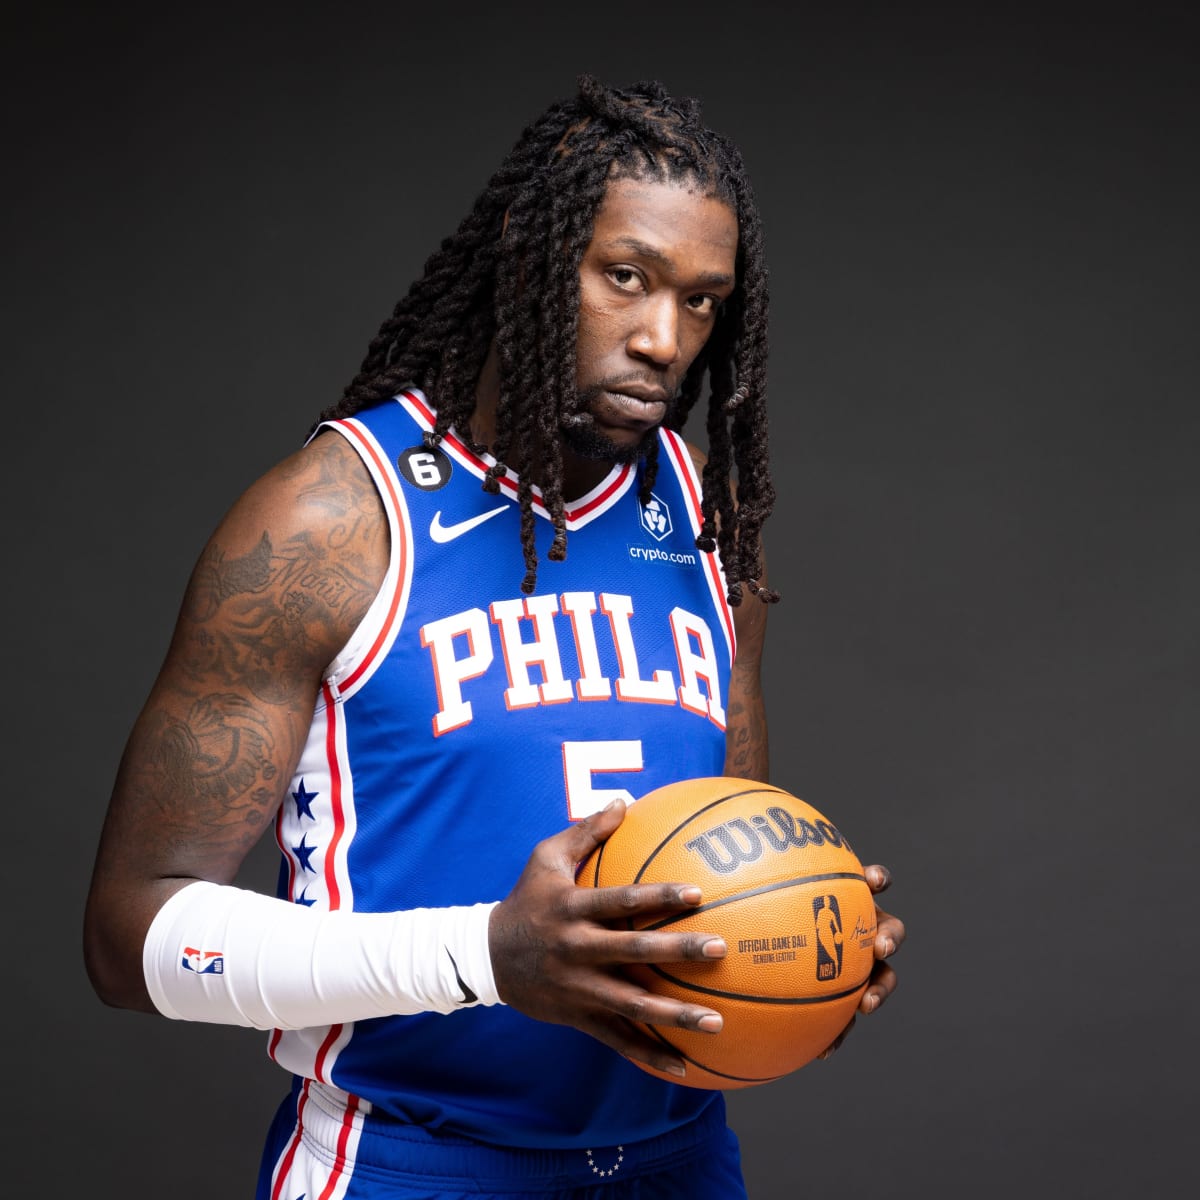 Free agent Montrezl Harrell signs with the Philadelphia 76ers